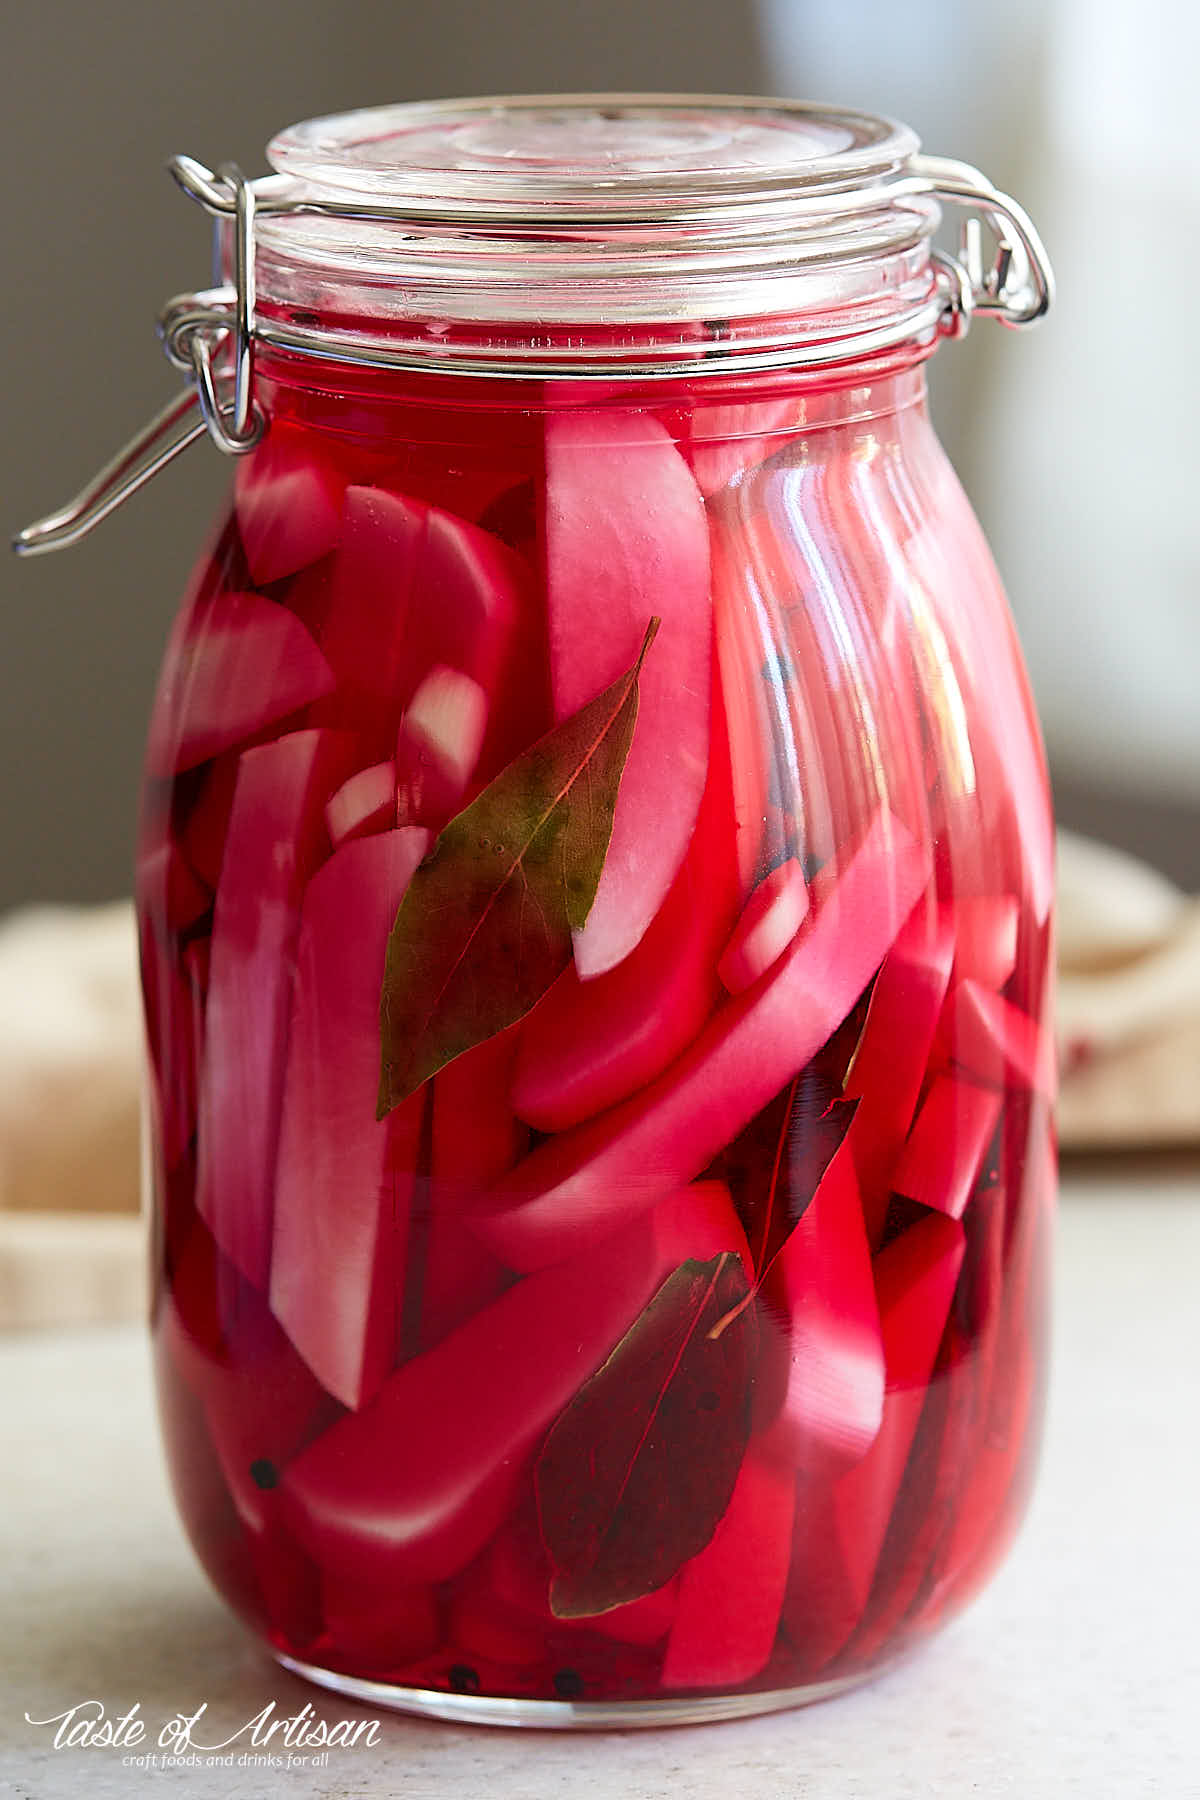 Turnips cut into pieces inside a jar filled with purple pickling juice.